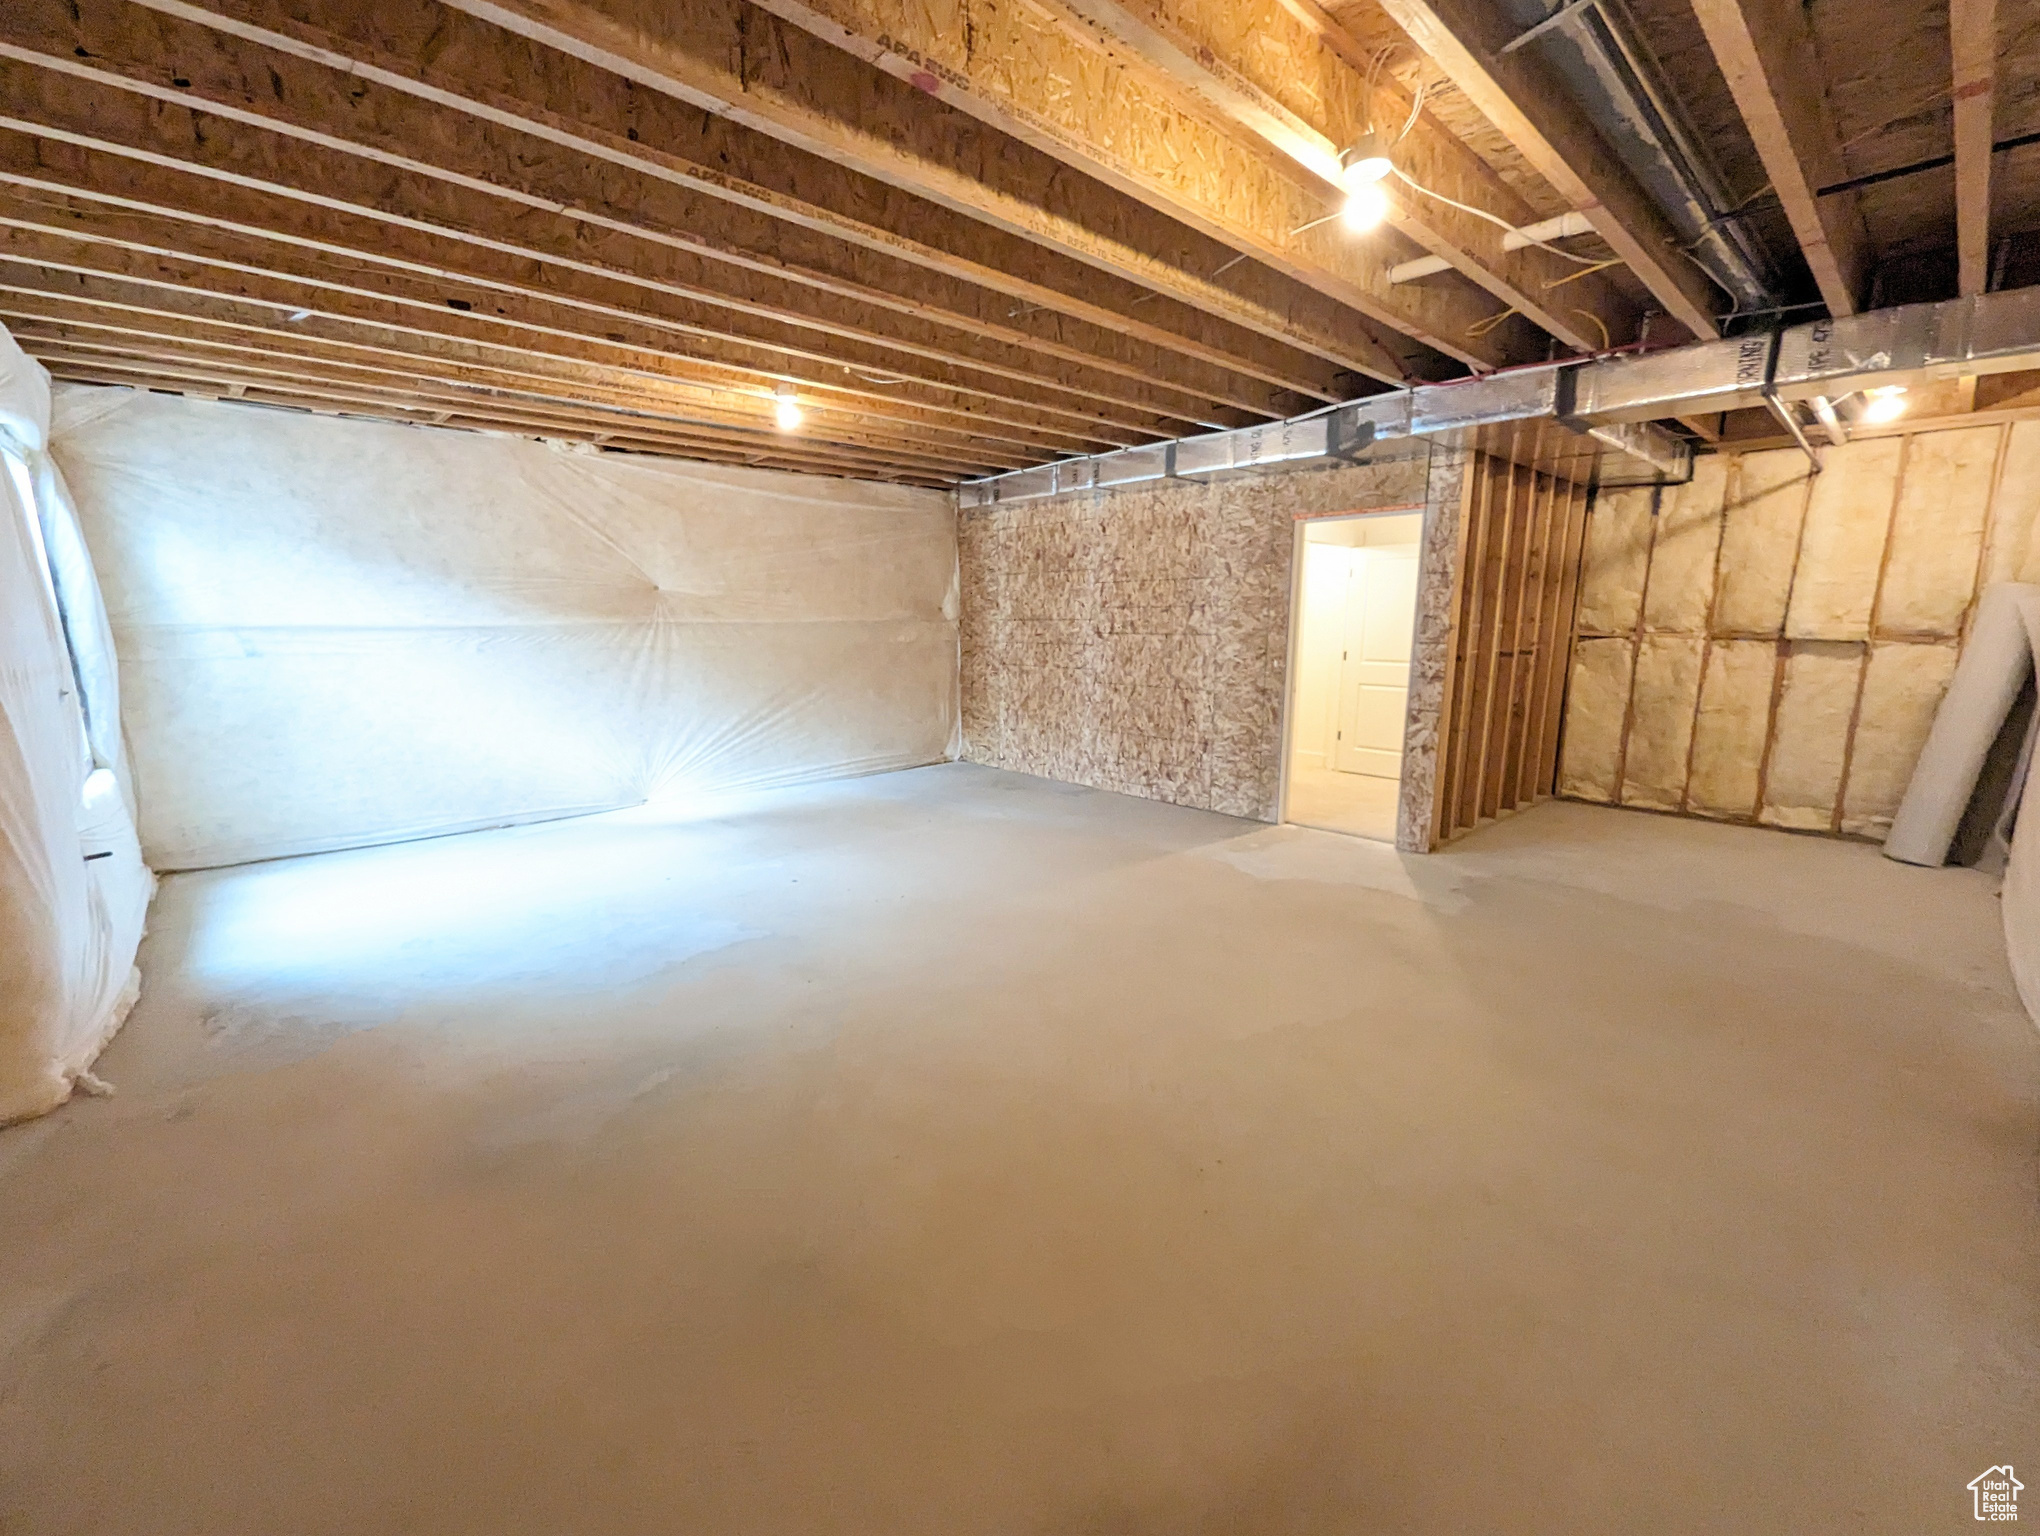 Unfinished basement with 9ft foundation